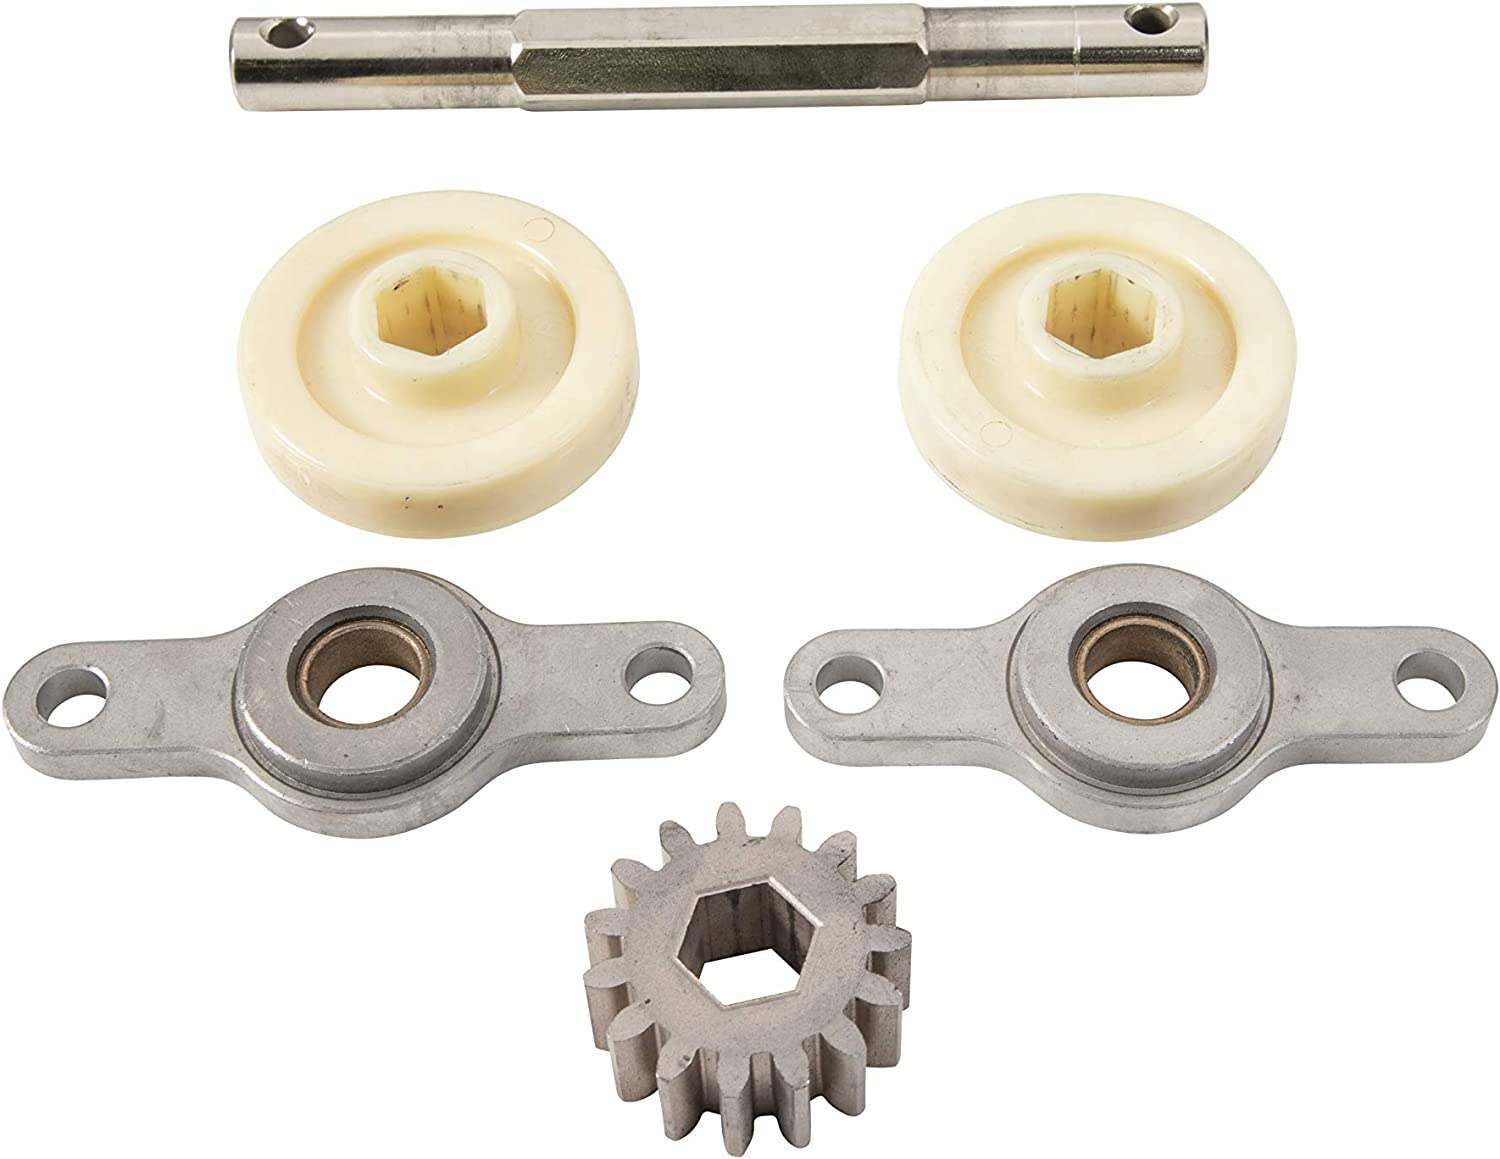 AP Products 014-324869 Standard Gear Pack Assembly - 15 Teeth